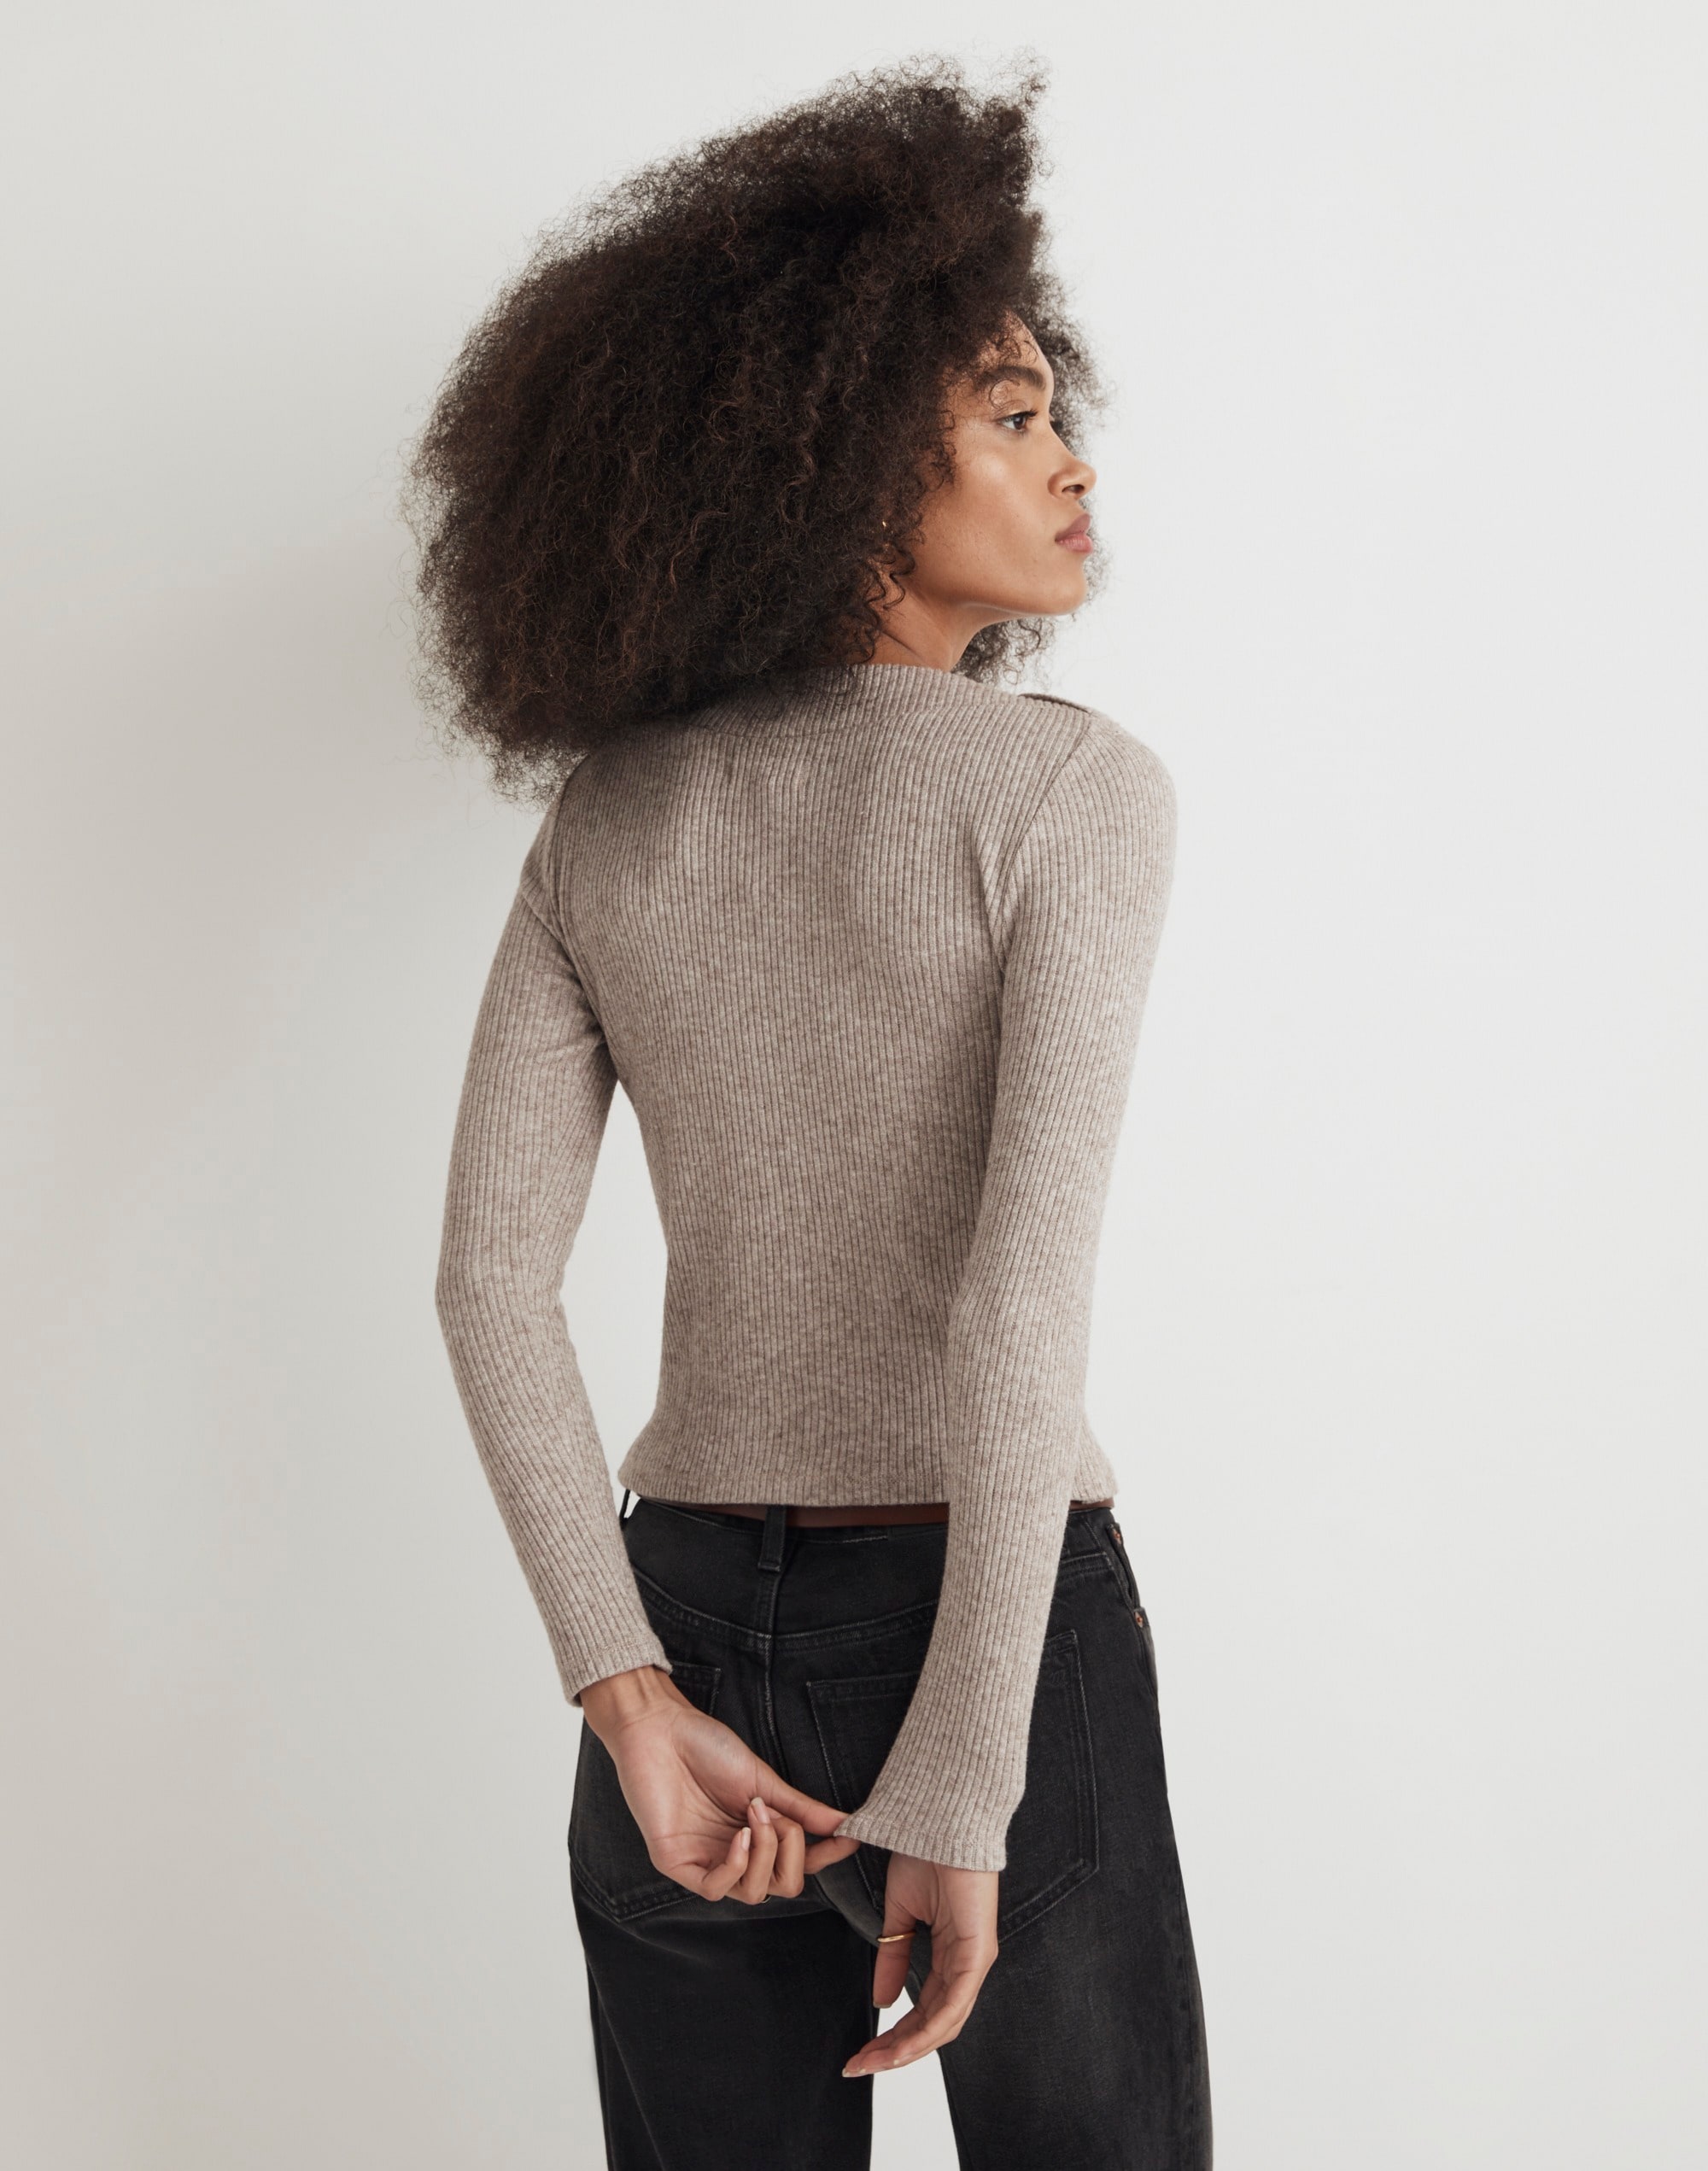 Boatneck Button Long-Sleeve Top